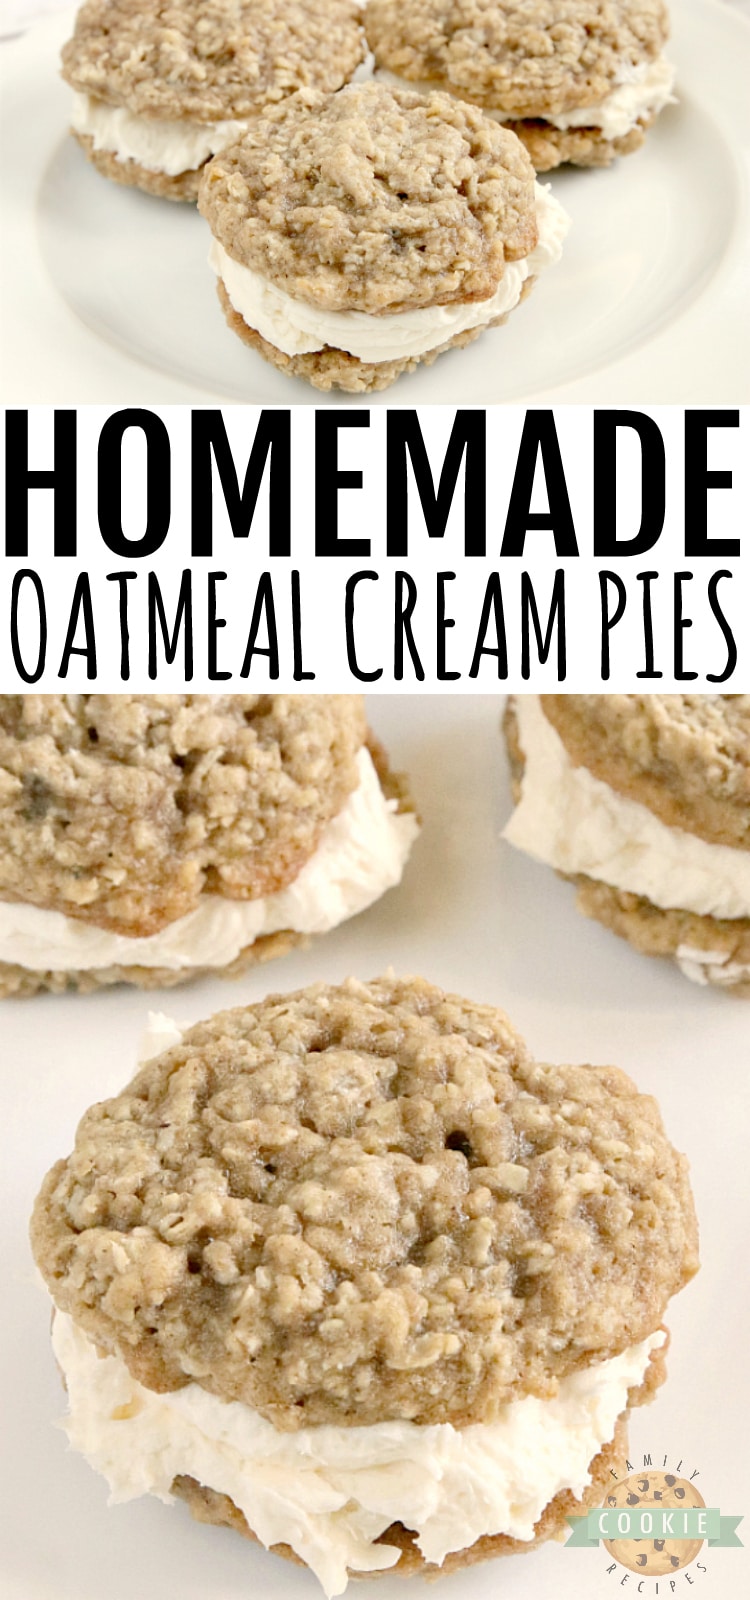 Homemade Oatmeal Cream Pies are made with a delicious creamy filling that is sandwiched between two soft and chewy oatmeal cookies. Even better than the store-bought variety that we all know and love! via @buttergirls